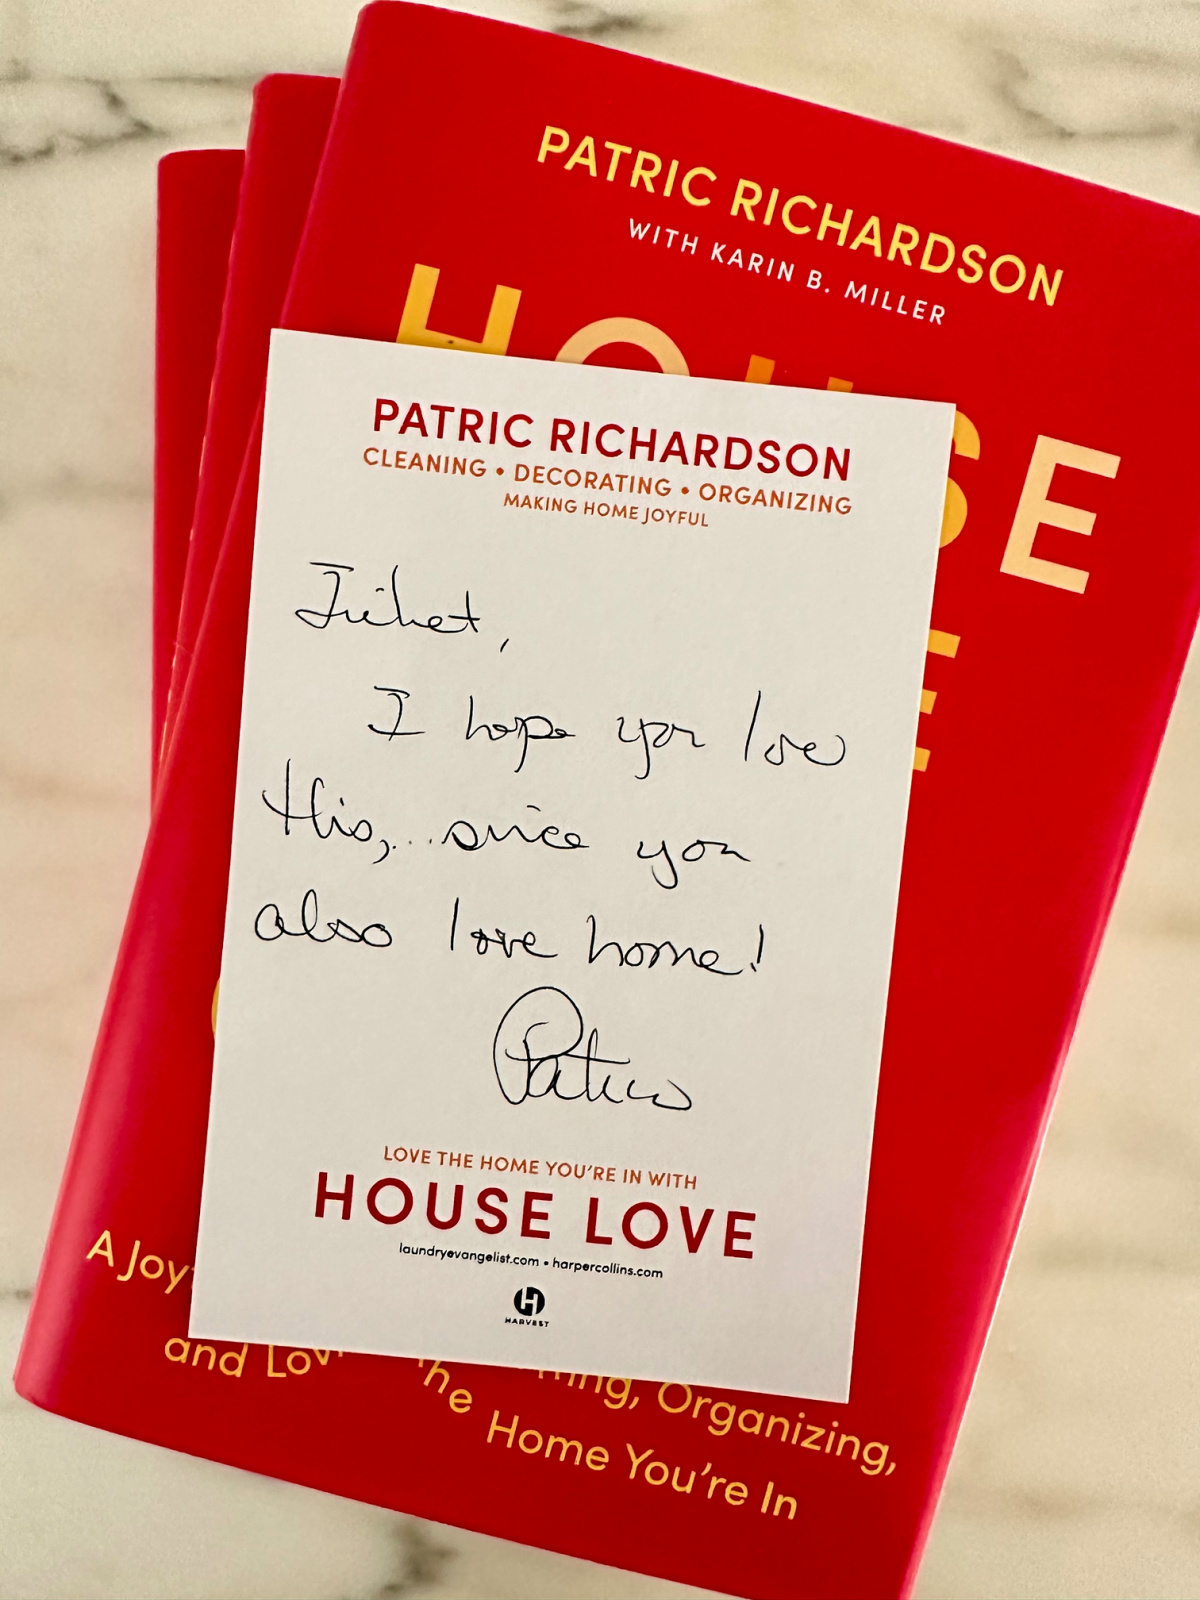 House Love book with note from author Patric Richardson.